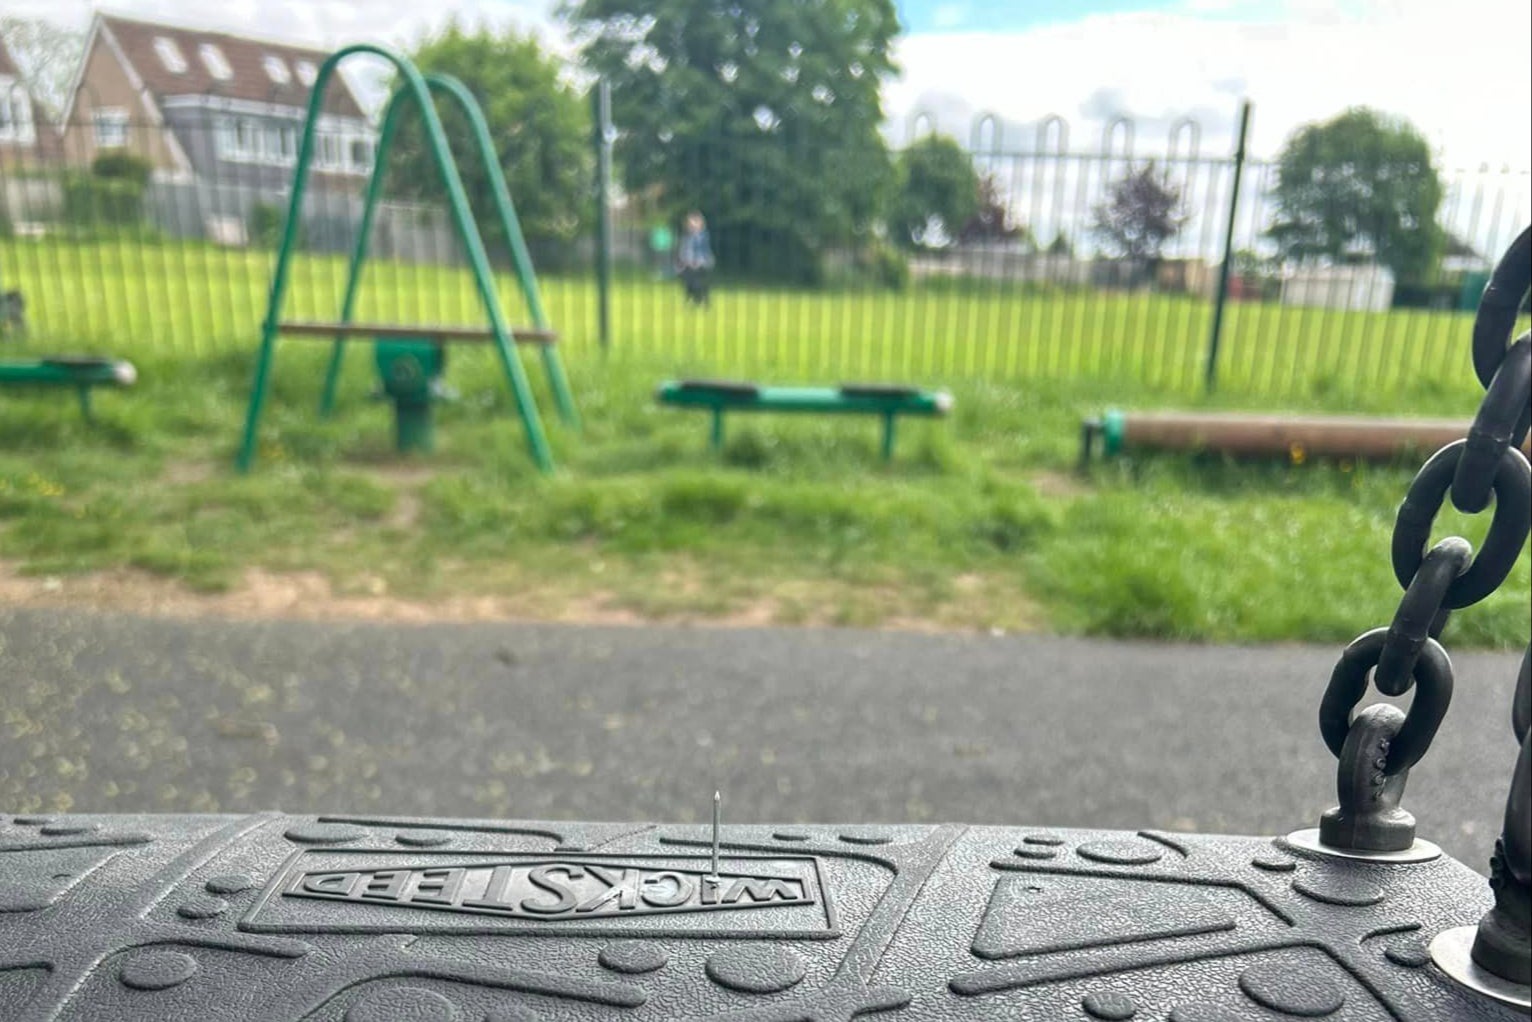 A nail sticks out of the swings that a young girl was about to be lowered on to